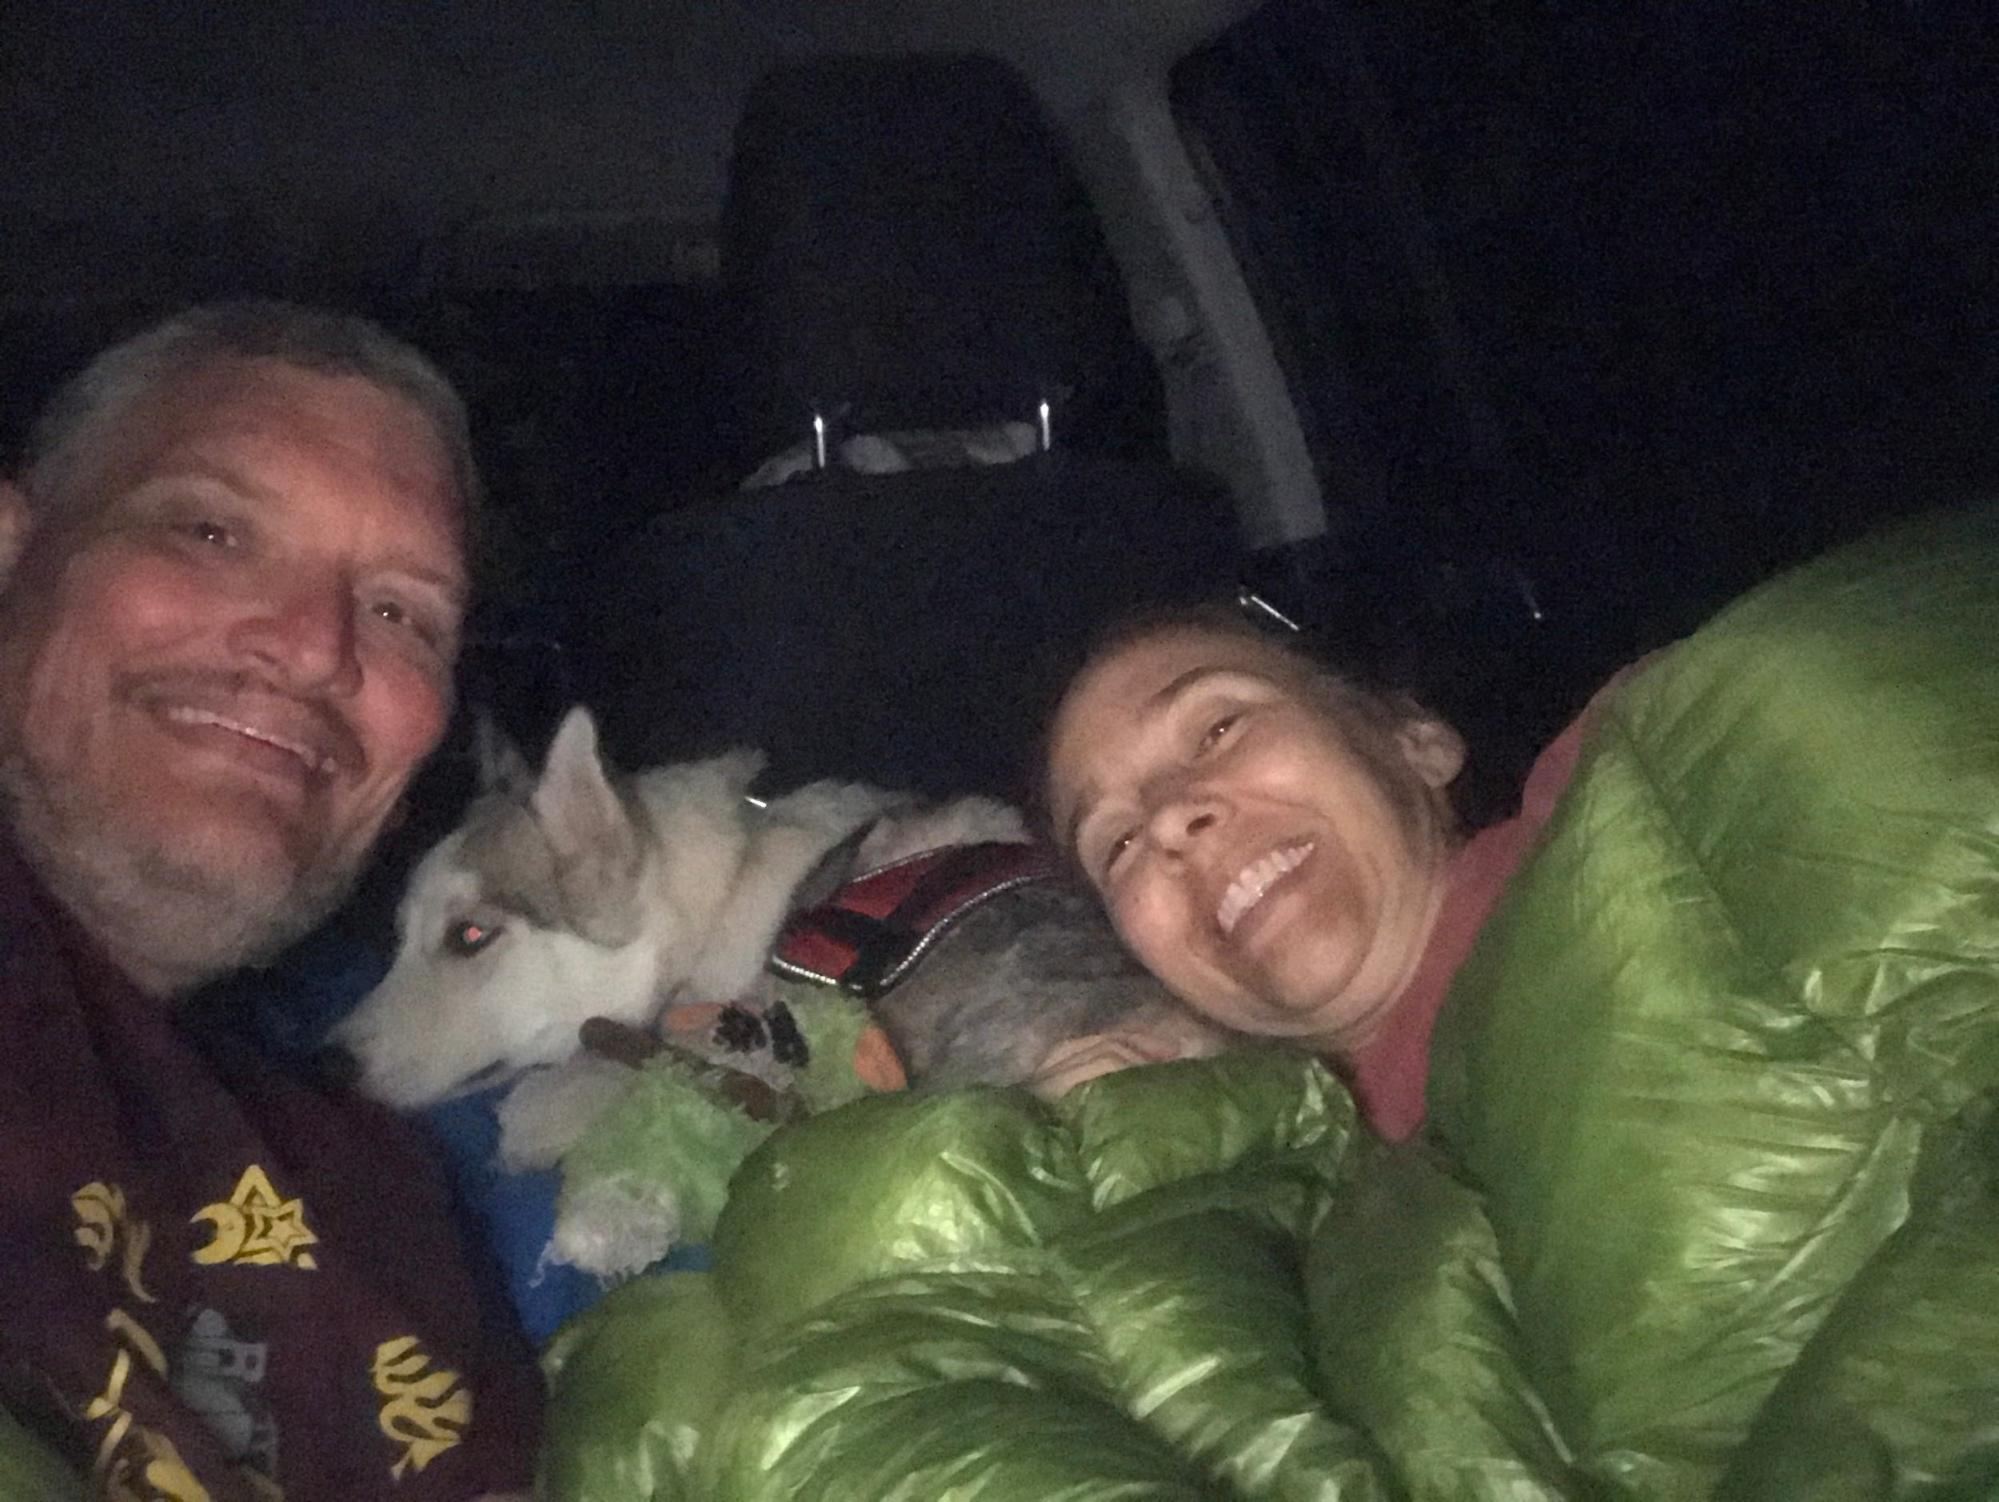 Car camping in Sweden